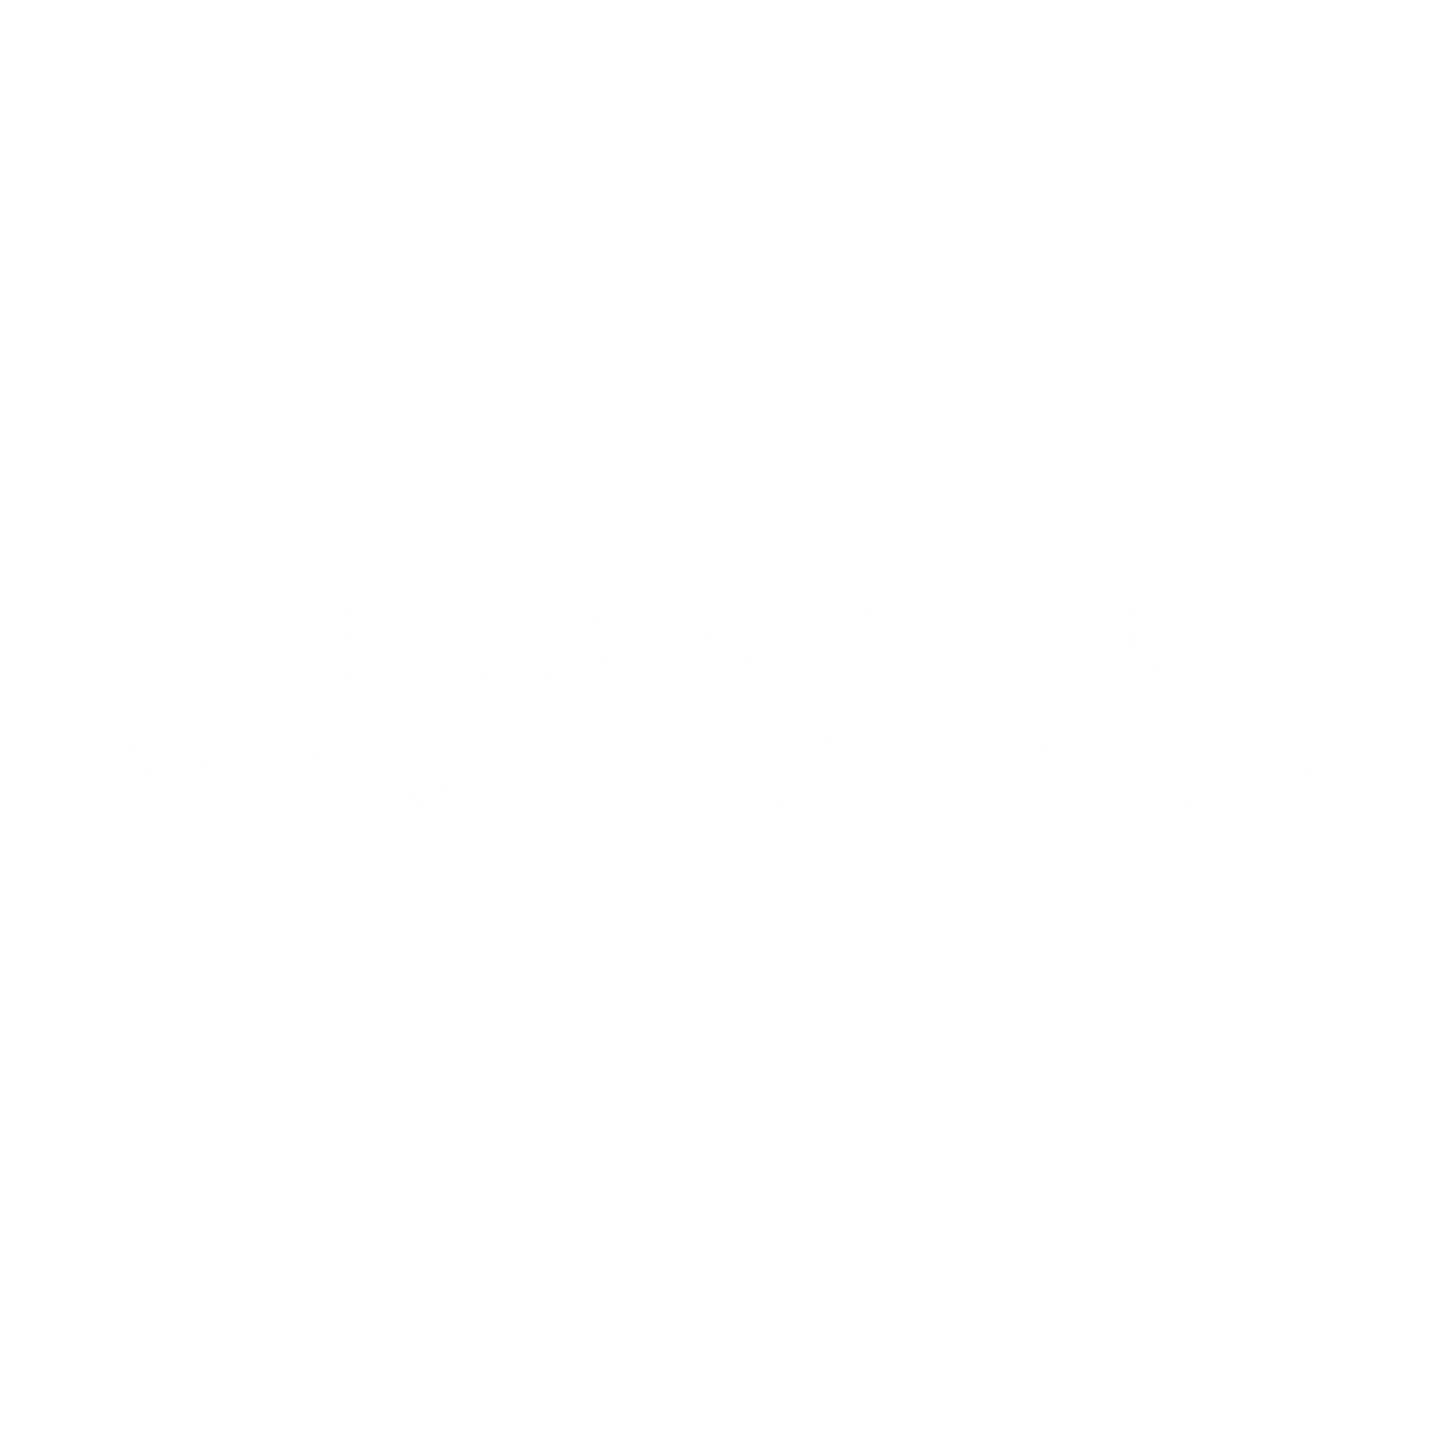 Rights Don't End Where Feelings Begin